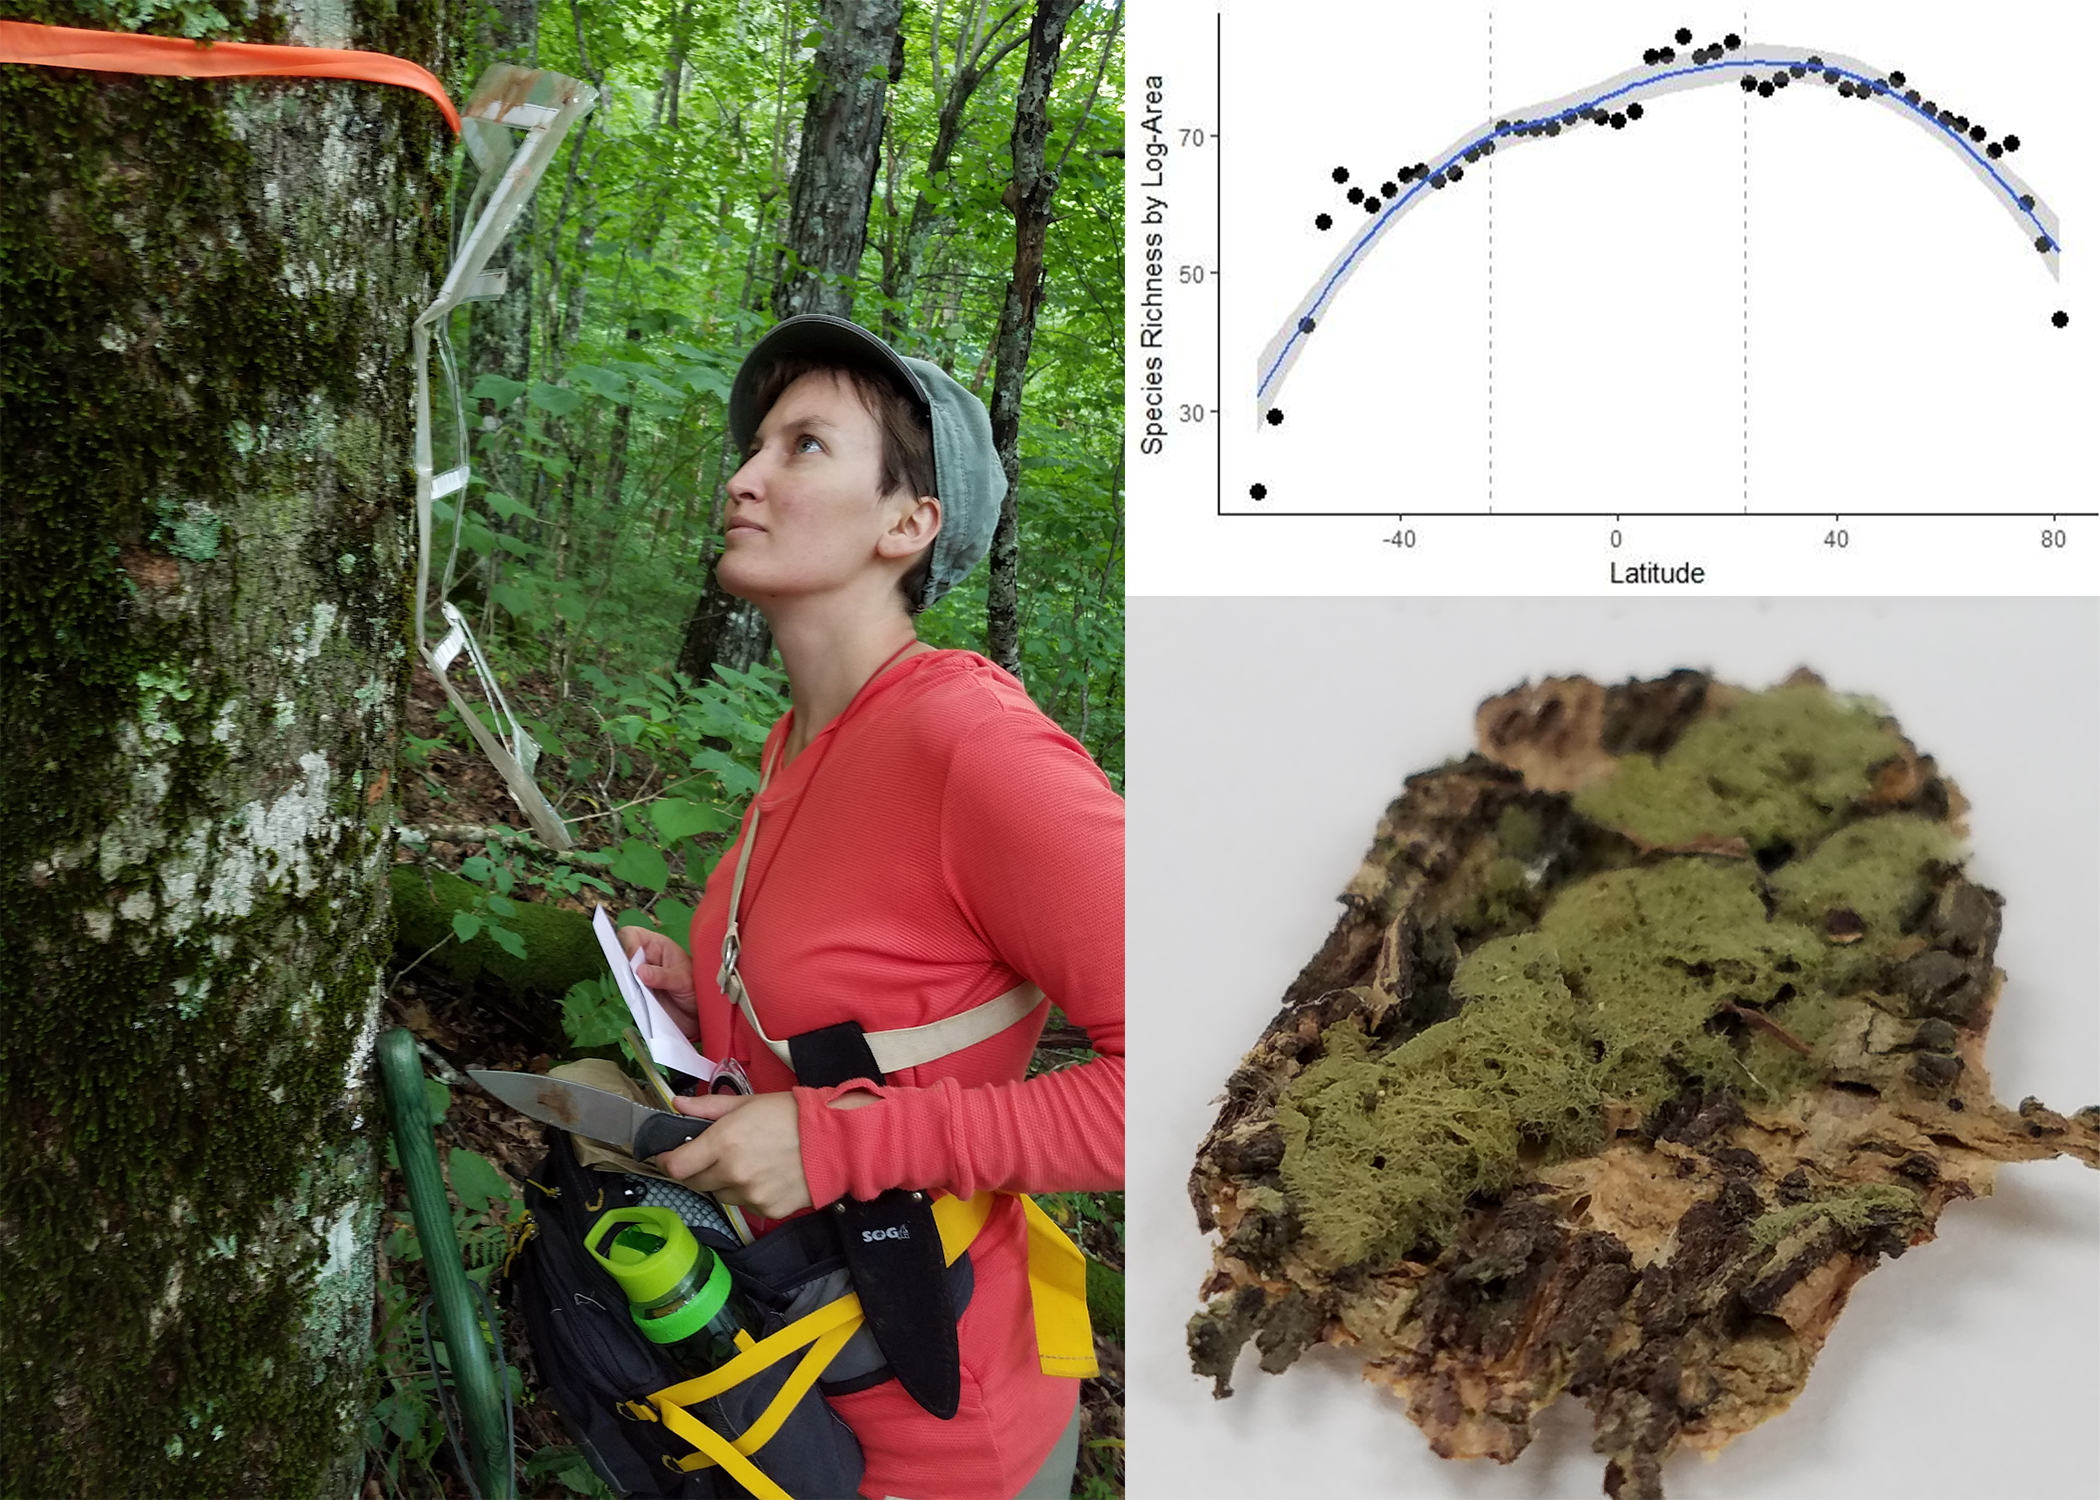 Left Image: Klara Scharnagl inspecting tree. Right top image: graph. Right bottom image: log with lichens